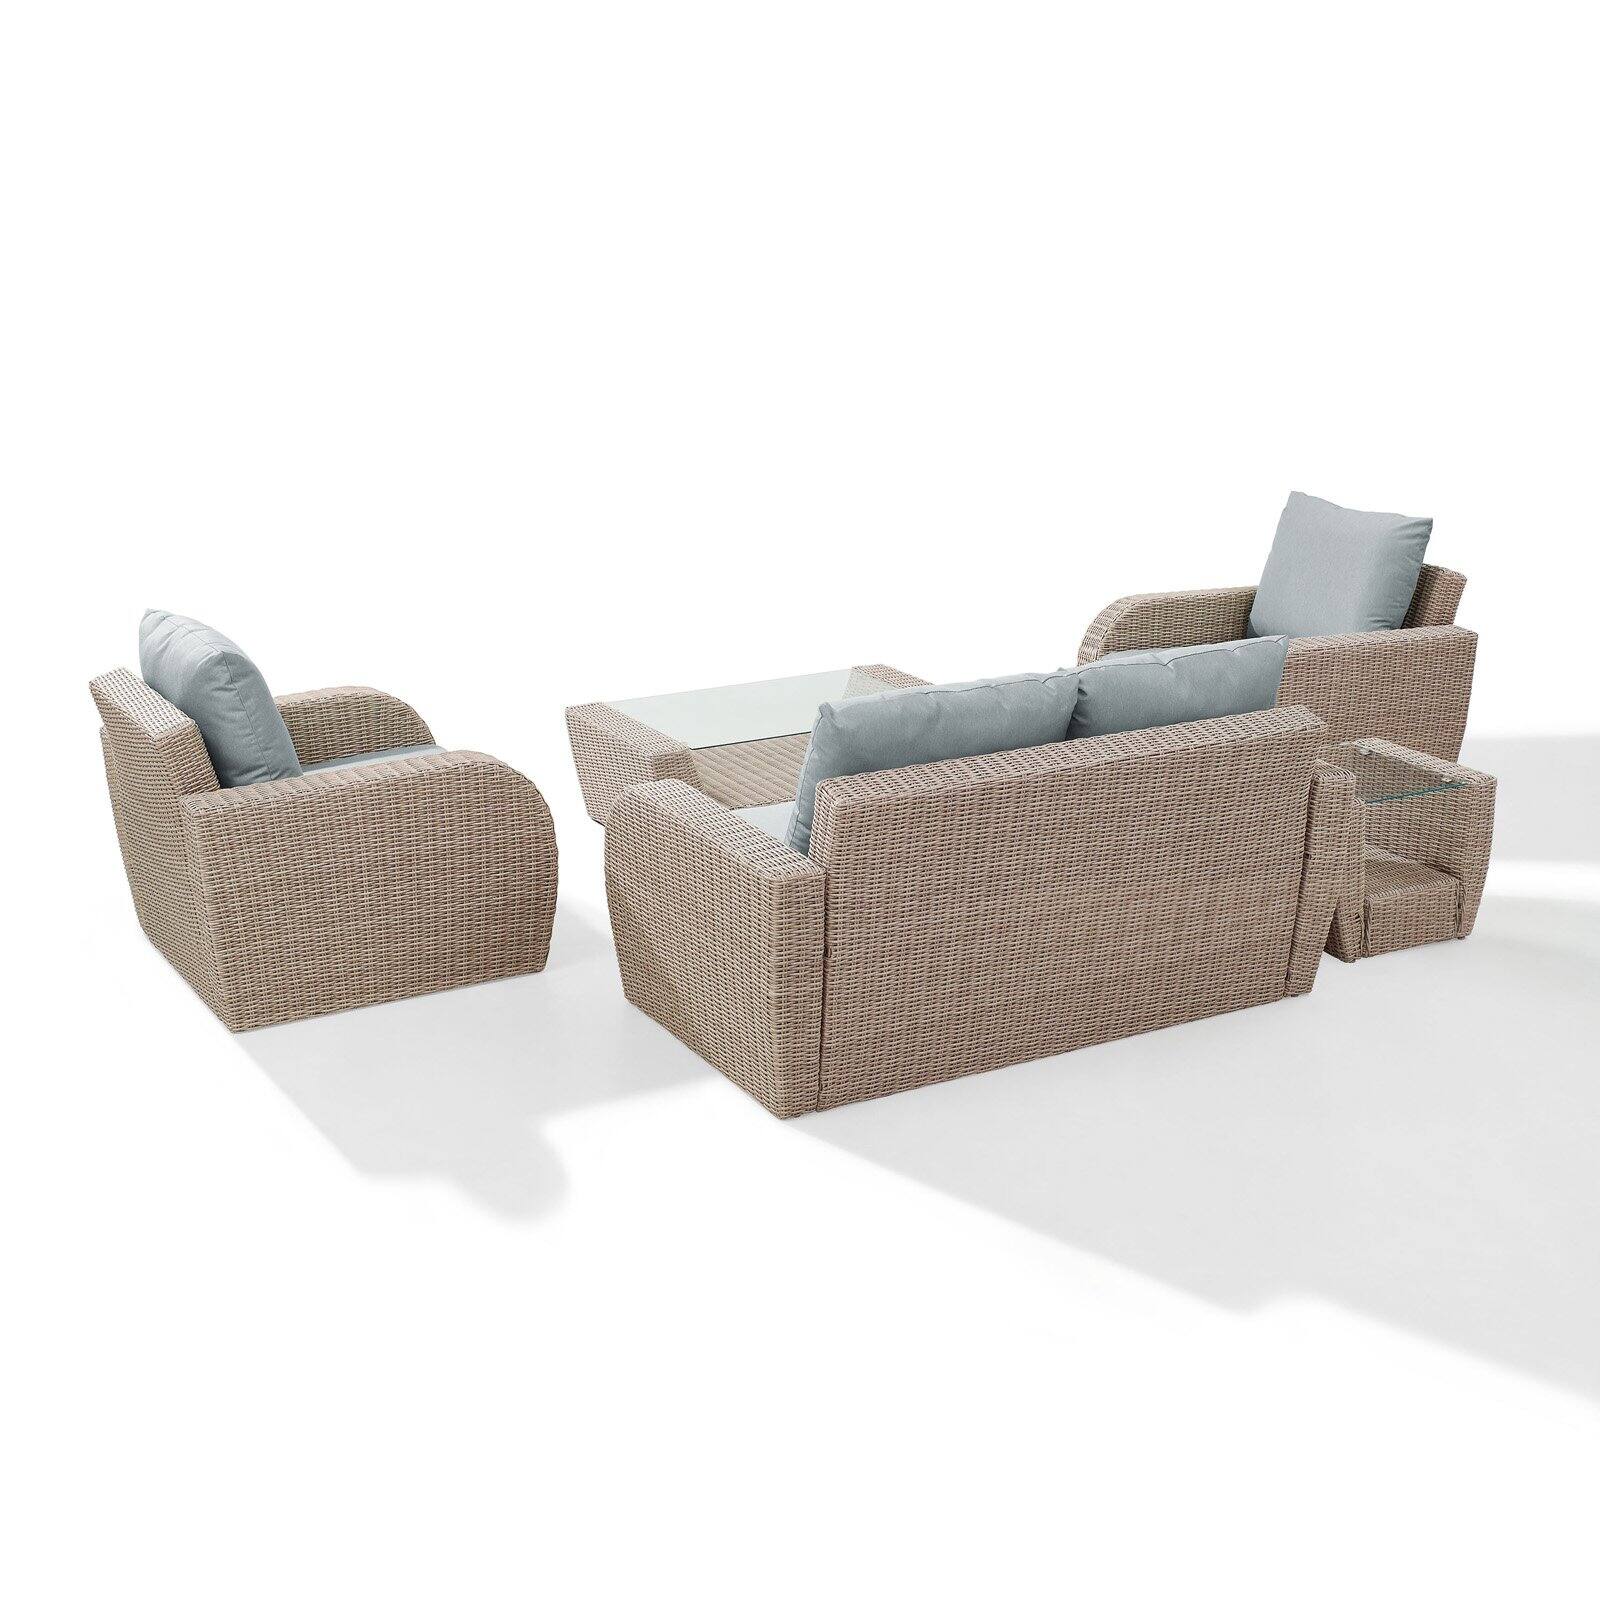 Crosley Furniture St Augustine 5 Pc Outdoor Wicker Seating Set With Oatmeal Cushion - Loveseat, Two Chairs, Coffee Table, Side Table - image 5 of 11